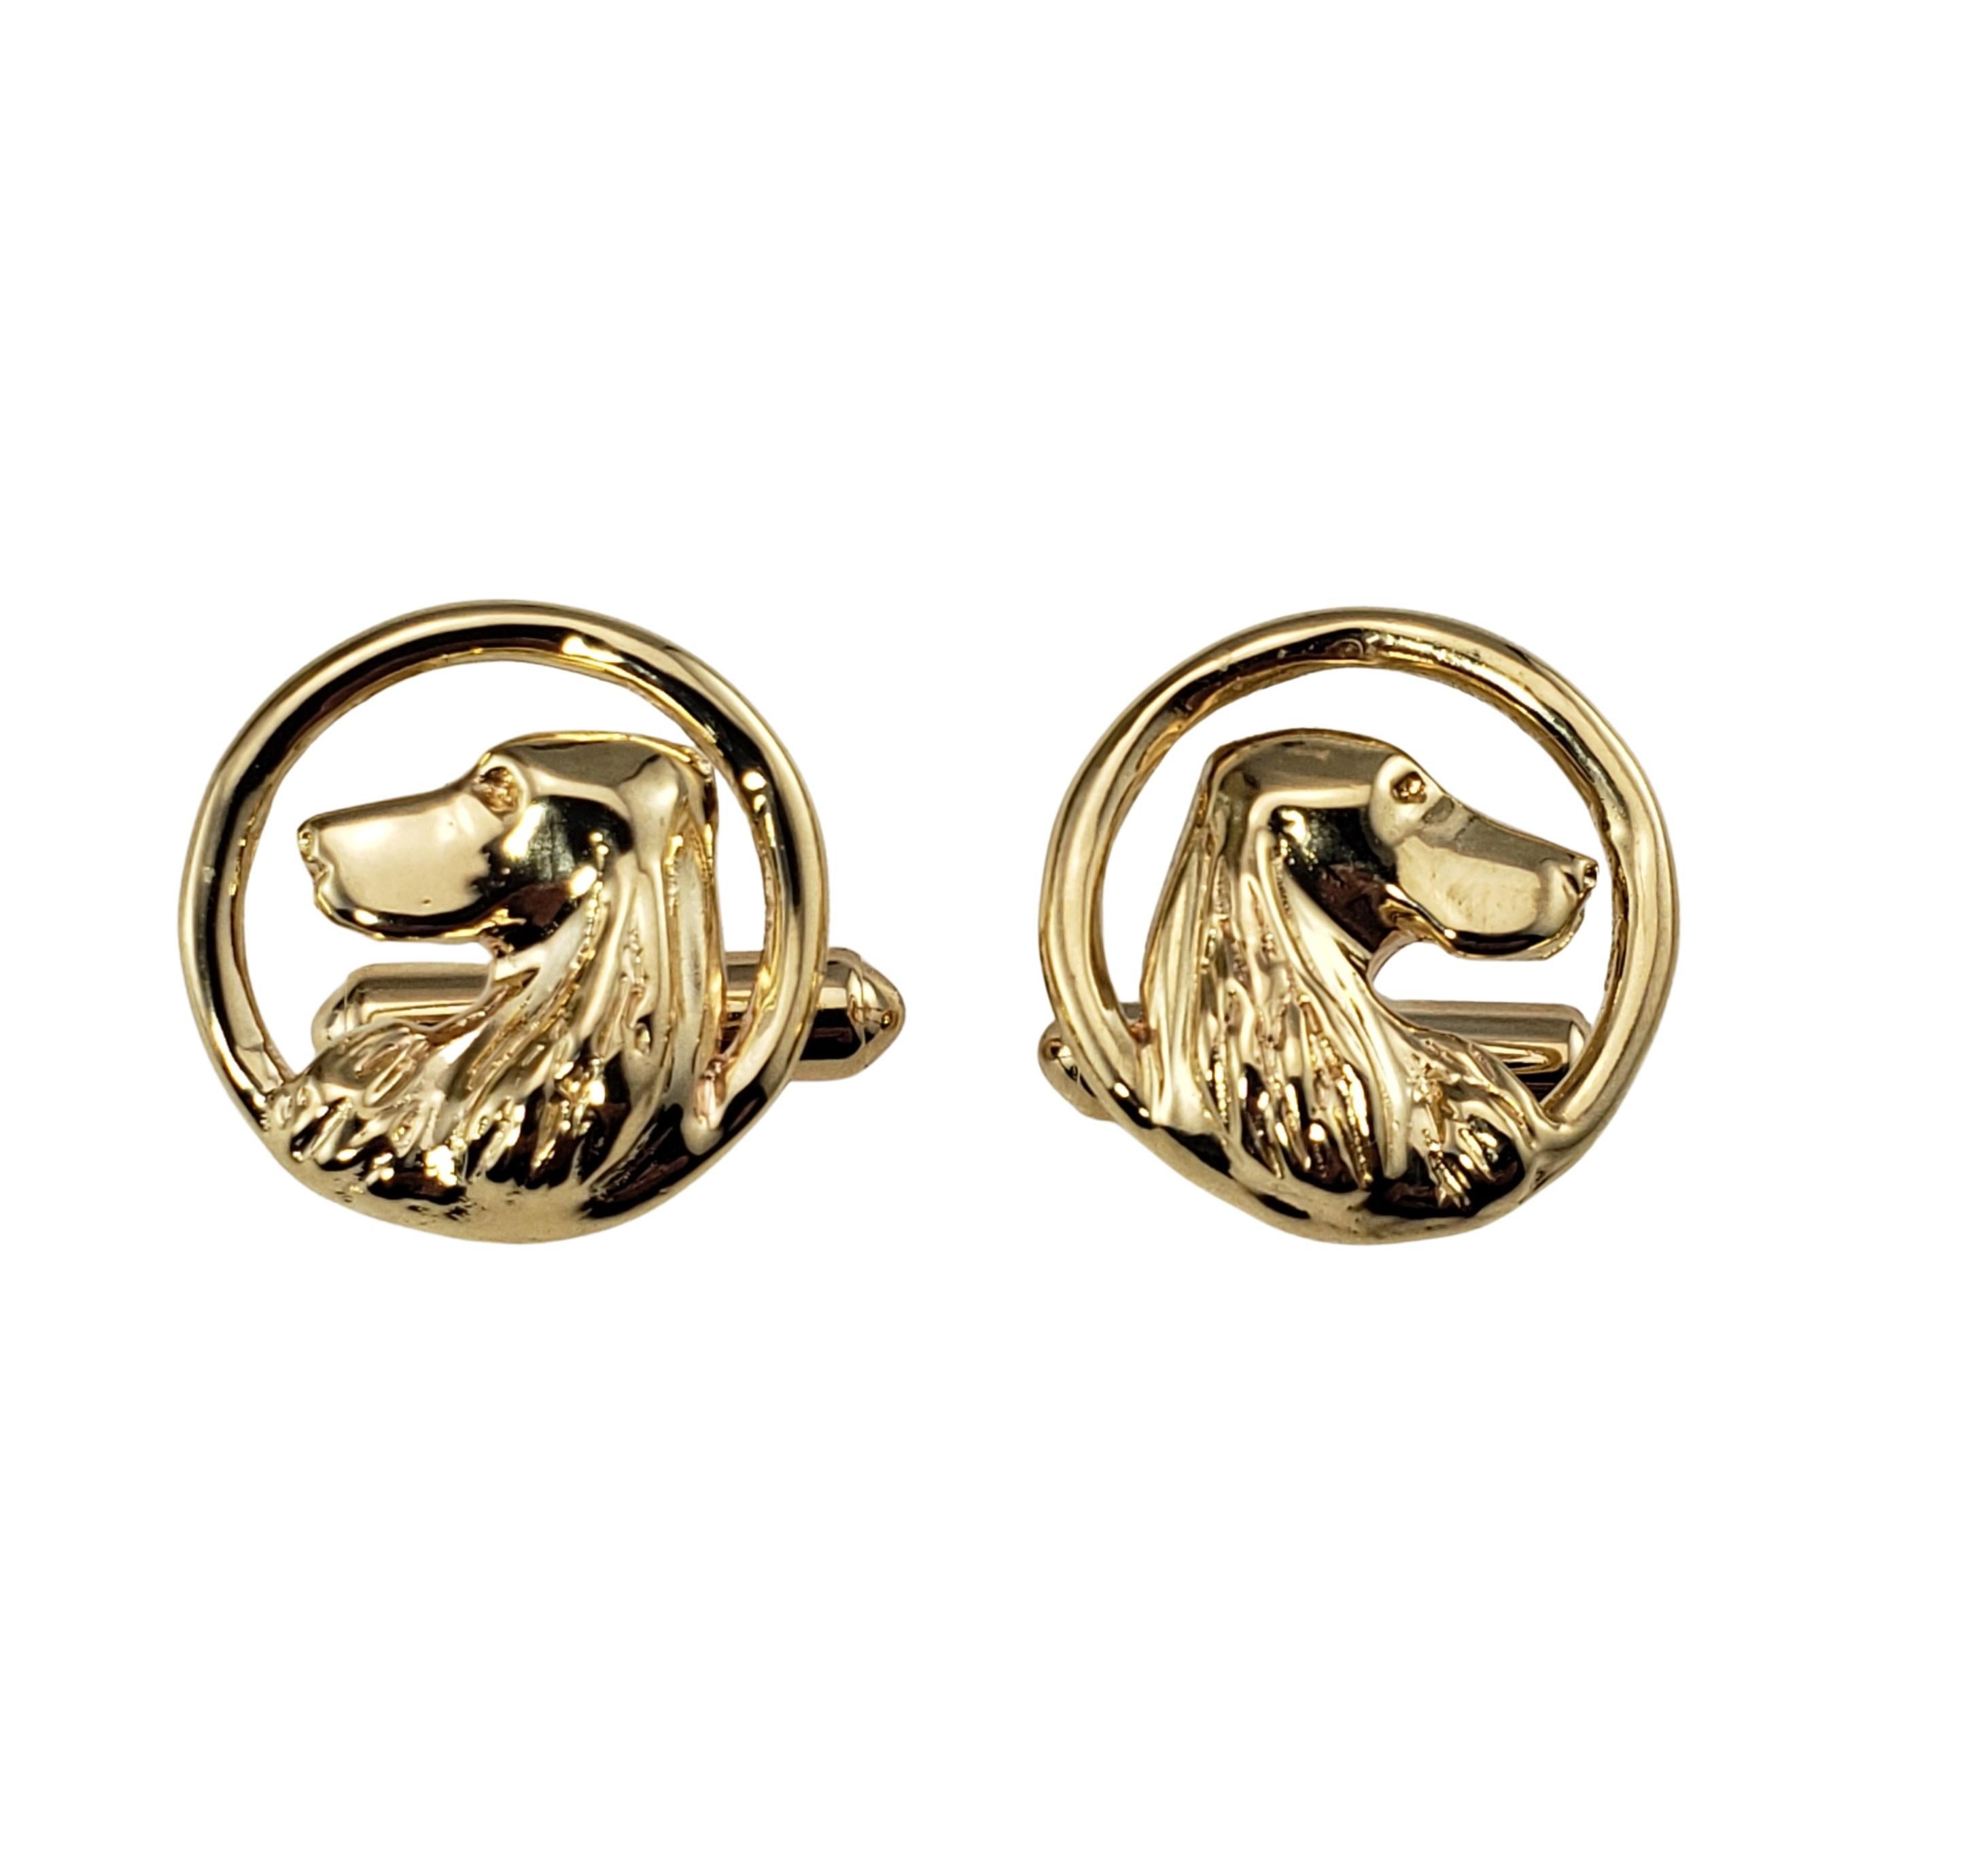 Vintage 14 Karat Yellow Gold Dog Cufflinks-

These elegant cufflinks feature a handsome dog in profile crafted in beautifully detailed 14K yellow gold.

Size: 17 mm

Weight: 8.0 dwt. / 12.5 gr.

Stamped: 585

Very good condition, professionally